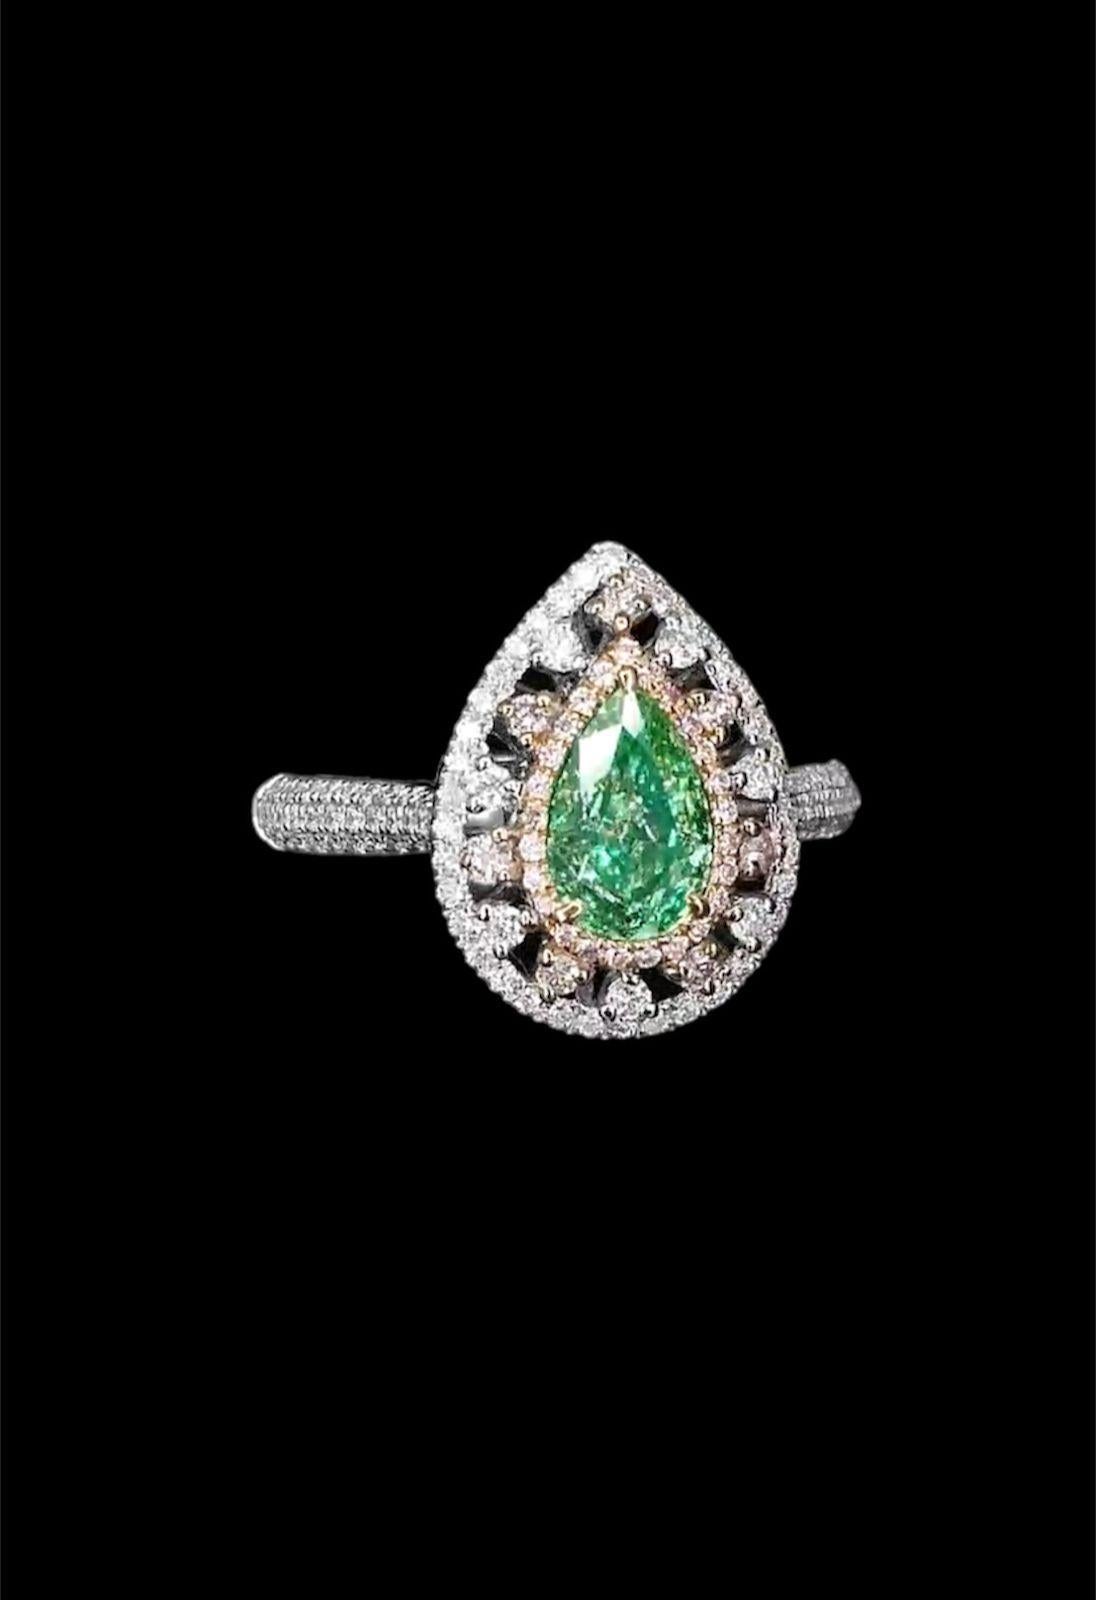 **100% NATURAL FANCY COLOUR DIAMOND JEWELRY**

✪ Jewelry Details ✪

♦ MAIN STONE DETAILS

➛ Stone Shape: Pear
➛ Stone Color: Fancy Green
➛ Stone Clarity: VS
➛ Stone Weight: 1.00 carats
➛ AGL Certified 

♦ SIDE STONE DETAILS

➛ Side white diamonds -